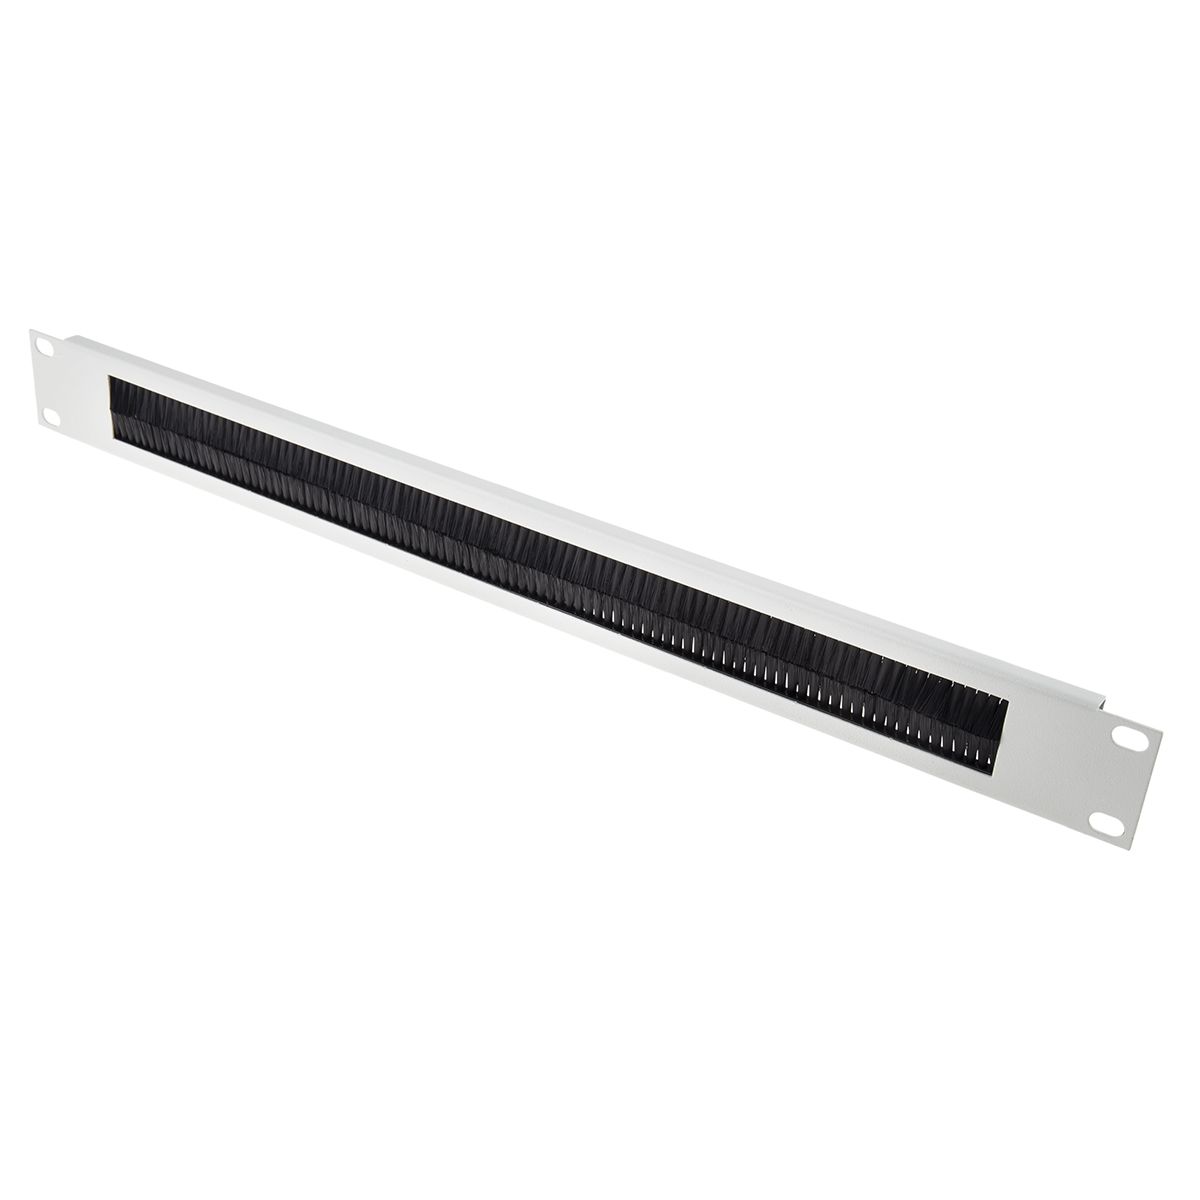 RS PRO Steel Cable Entry Panel for Use with 1U Rack Unit, 483 mm x 10 mm x 1 Uin